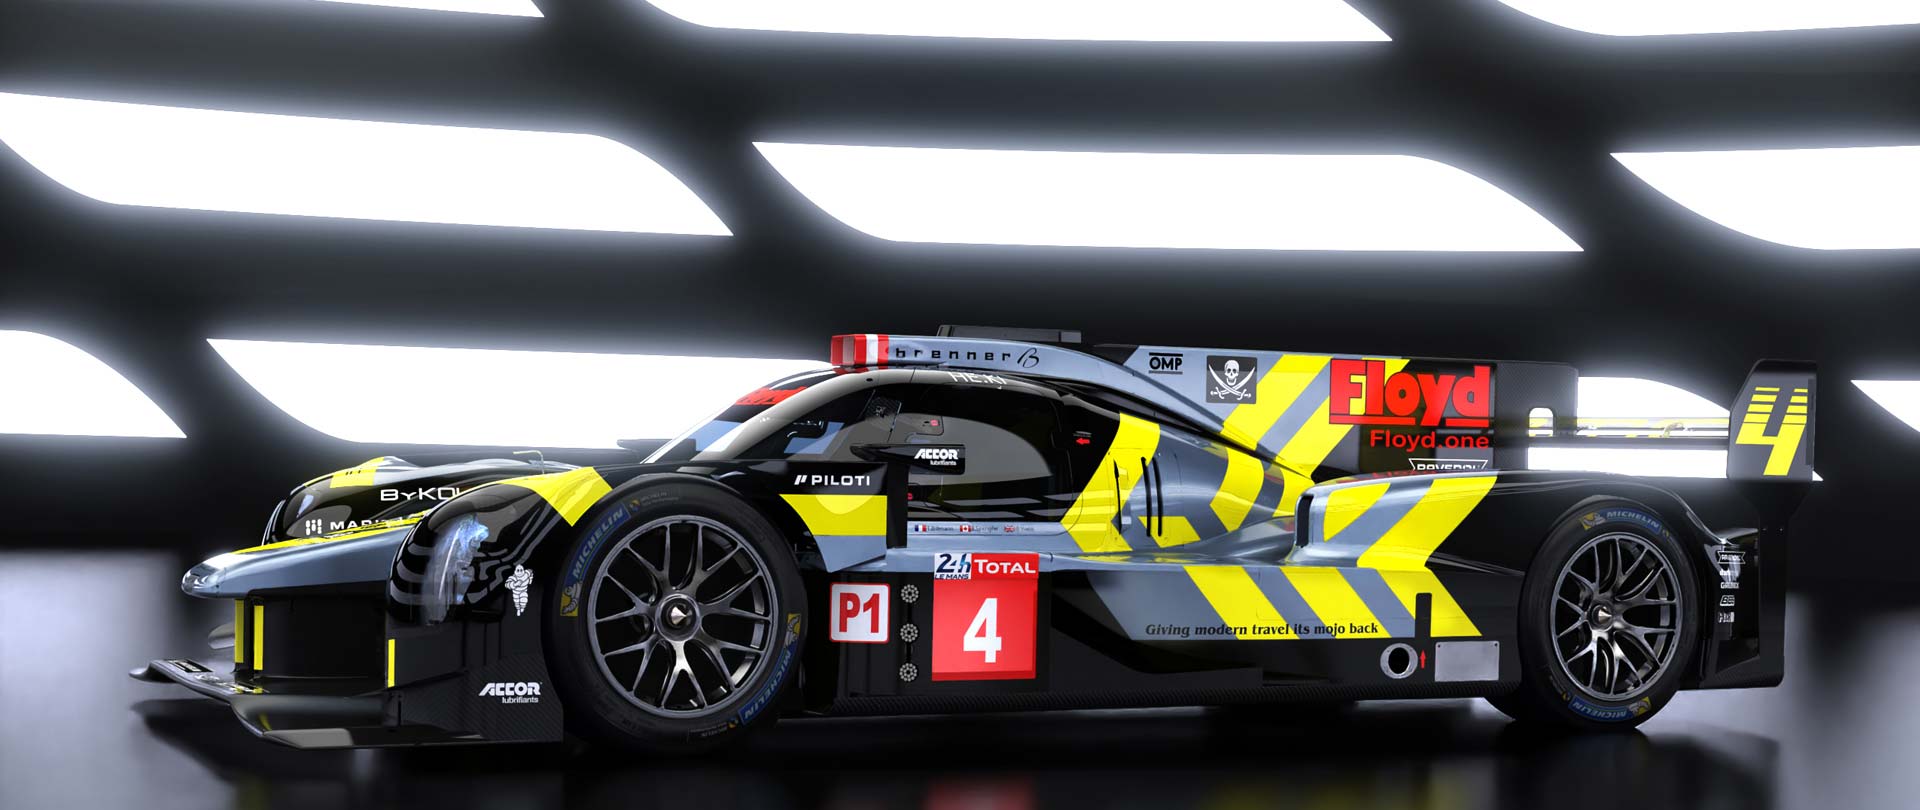 ByKOLLES Unveils New Car Livery For The 24 Hours Of Le Mans 2020